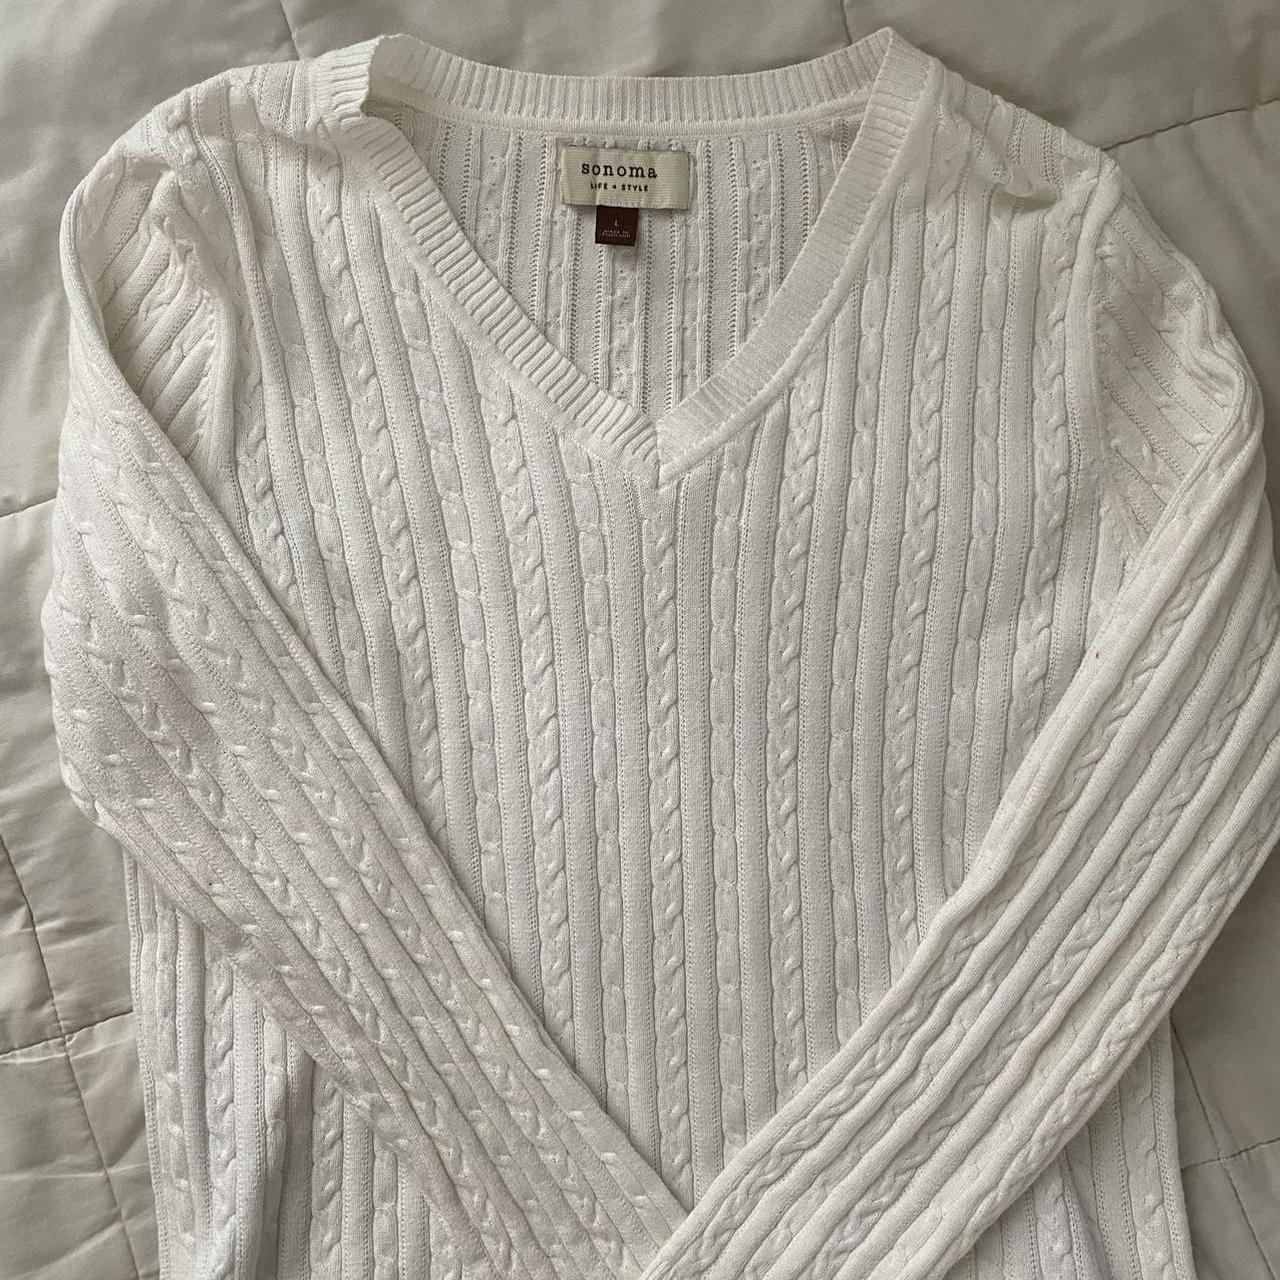 sonoma white cable knit v neck sweater thin but... - Depop